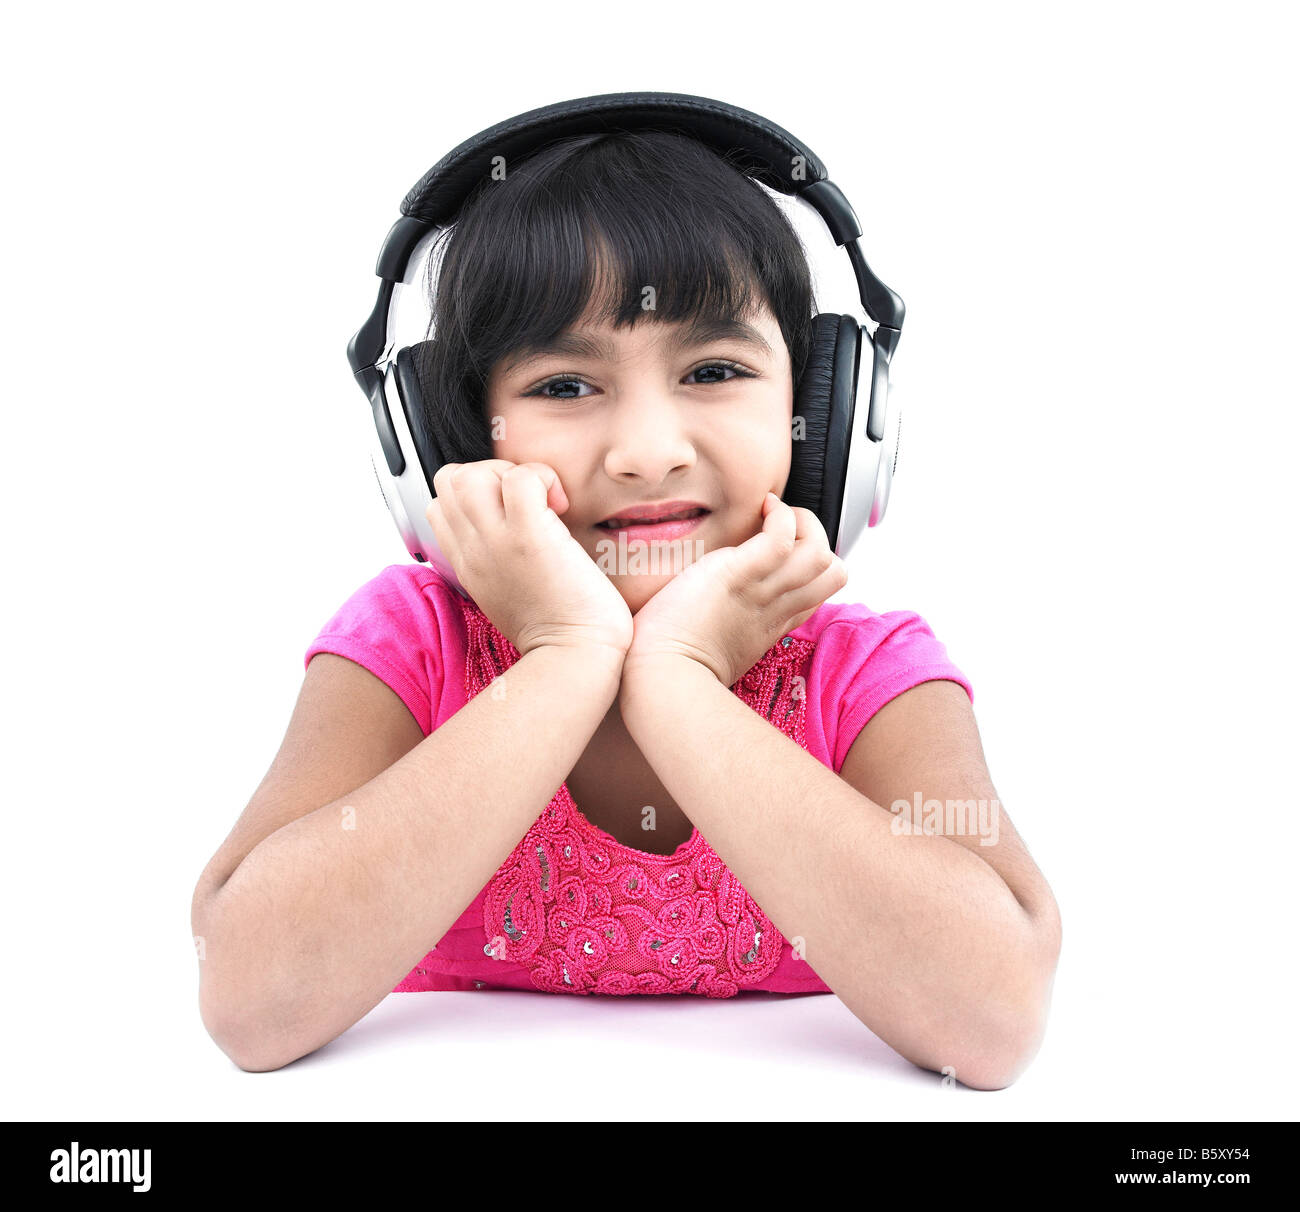 a pretty looking asian girl of indian origin listening to music Stock Photo